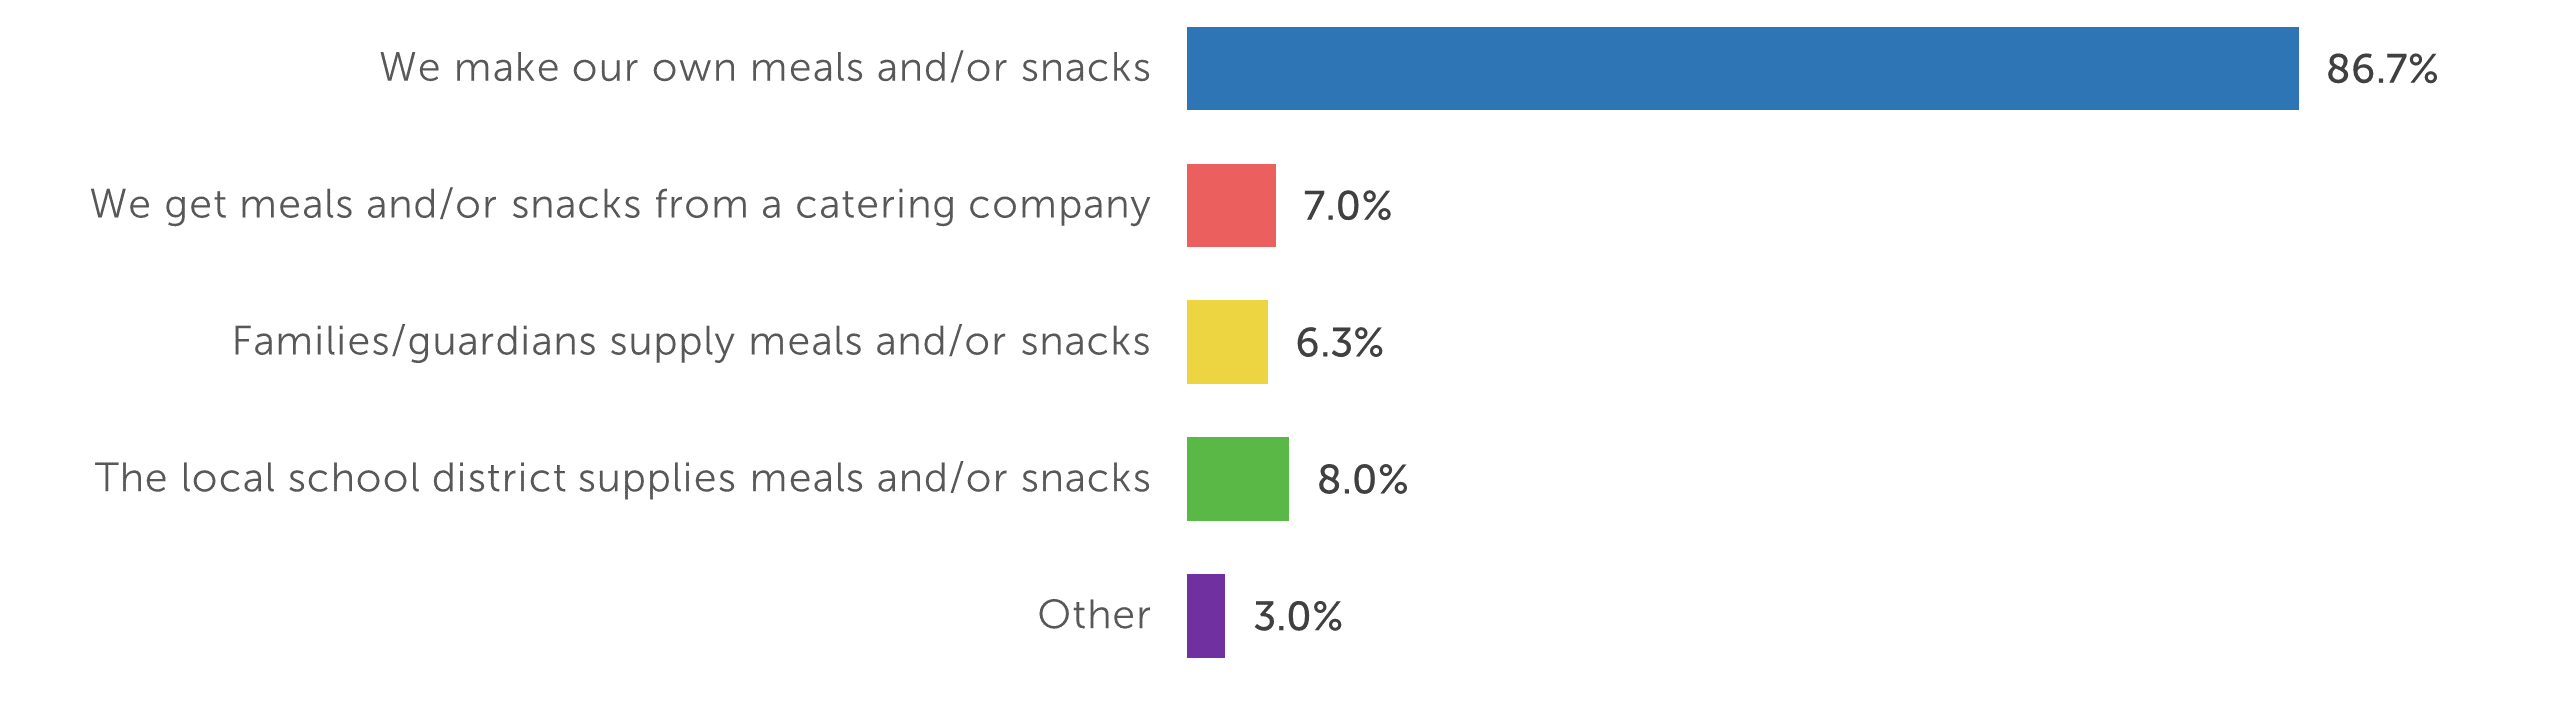 We make our own meals and/or snacks: 86.7%; We get meals and/or snacks from a catering company: 7.0%; Families/guardians supply meals and/or snacks: 6.3%; The local school district supplies meals and/or snacks: 8.0%; Other: 3.0%